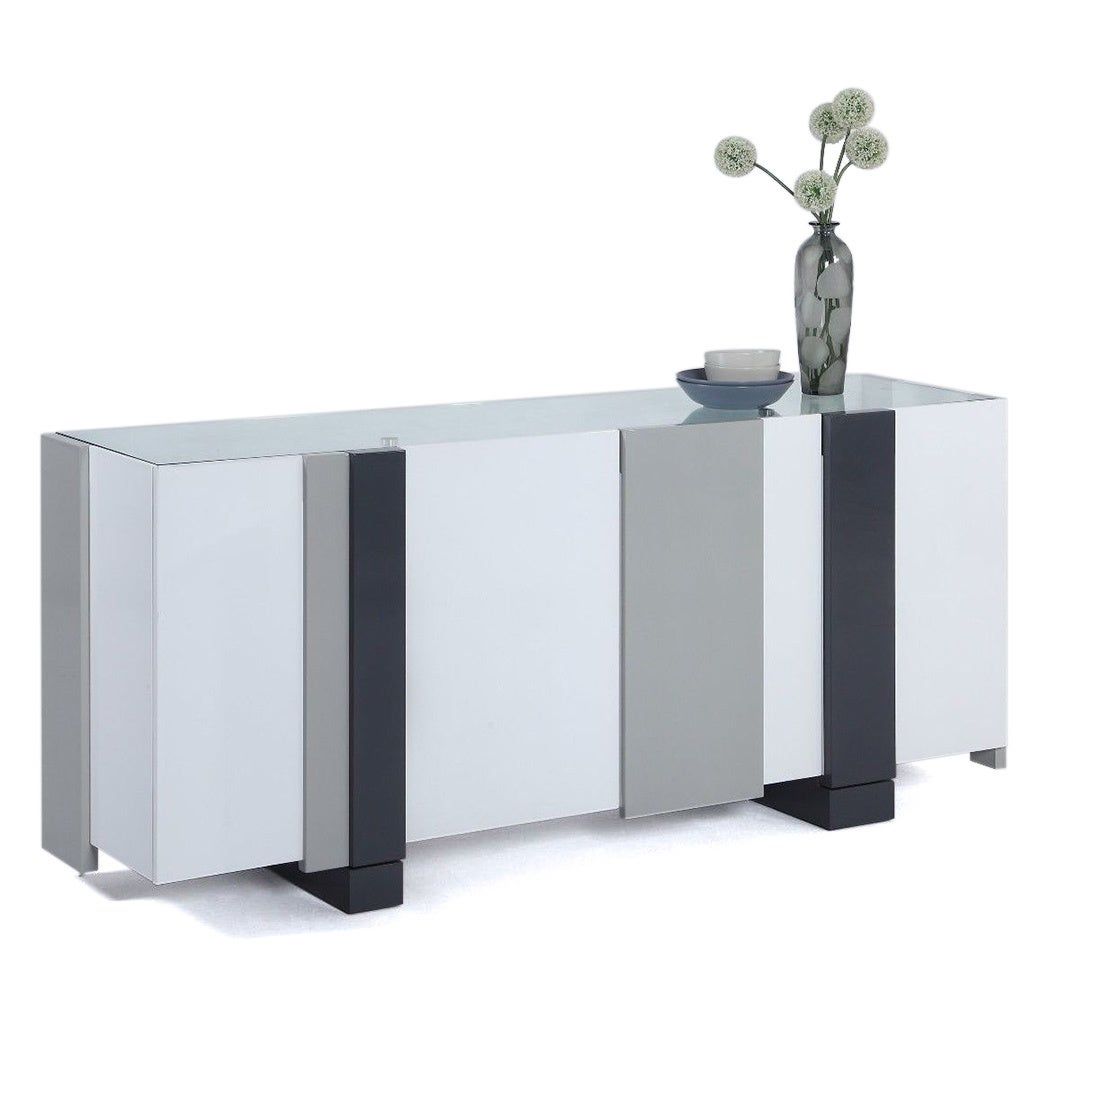 Somette White And Grey Laquered 4 Door Buffet With Glass Top Inside 4 Door Lacquer Buffets (View 10 of 30)